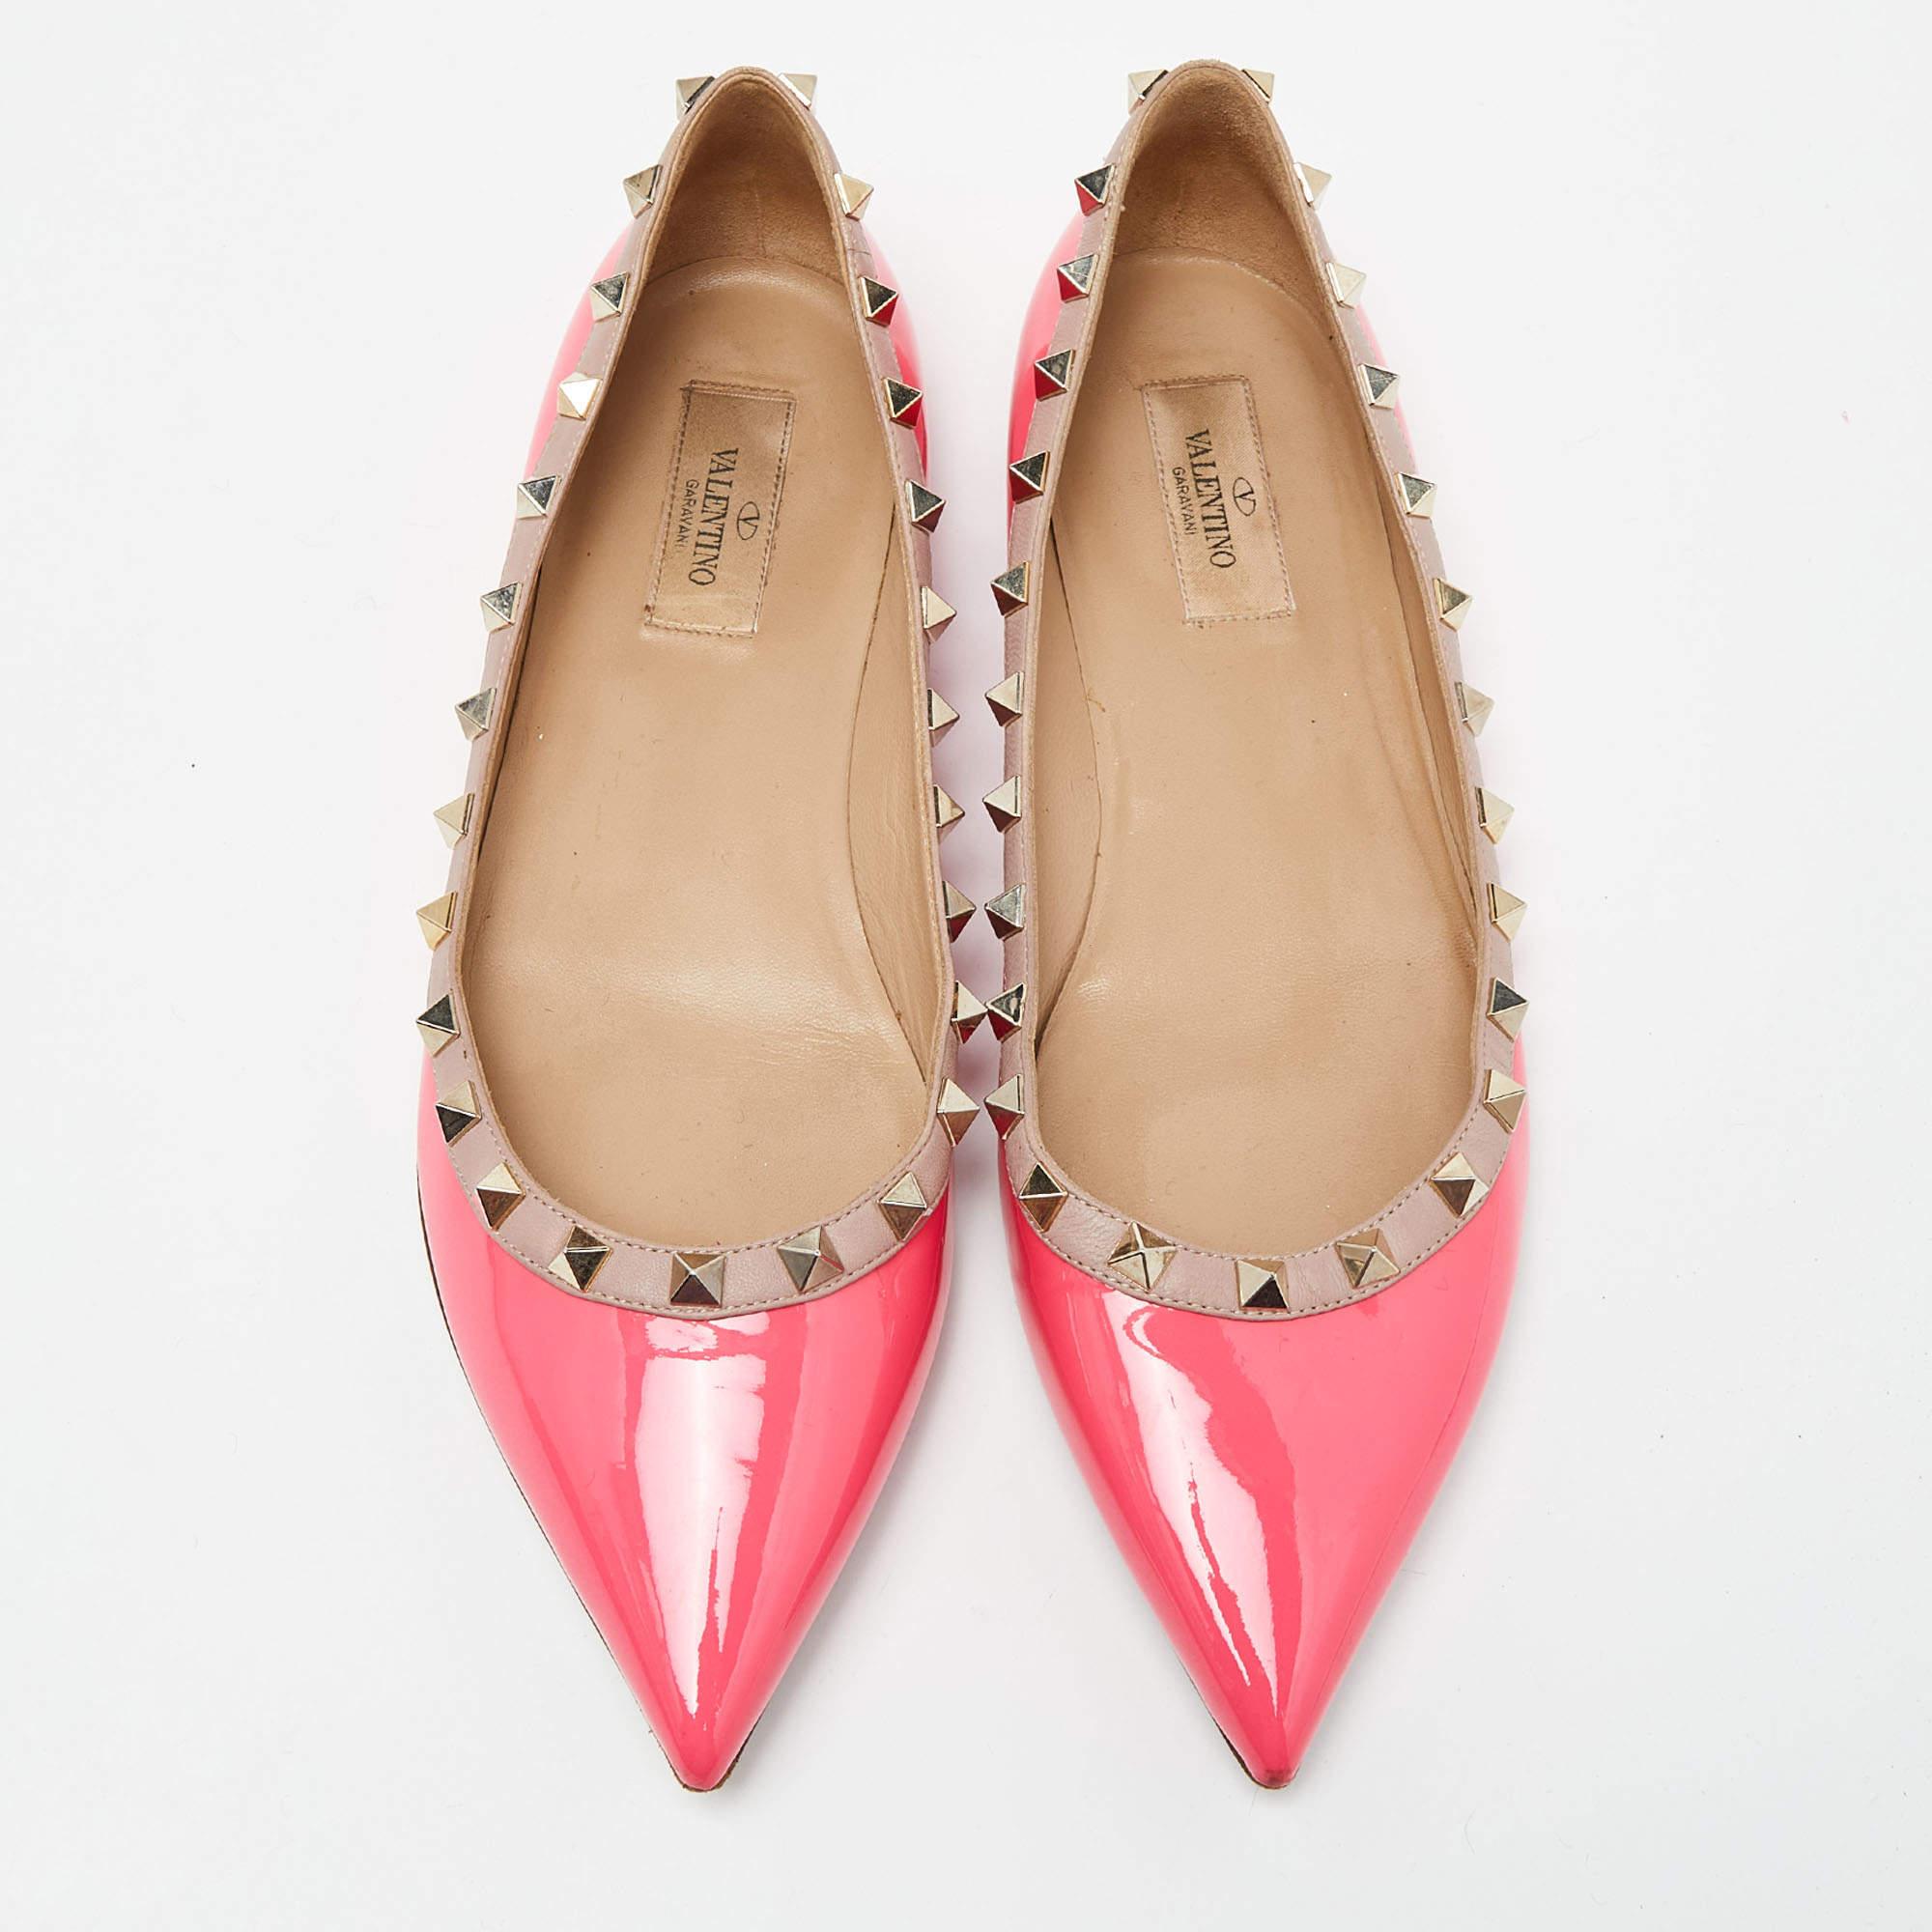 Valentino's ballet flats are simple and stylish exuding a blend of luxury and comfort. Crafted from patent leather and styled with a Rockstud trim on the topline, these flats with pointed toes, can be worn with almost anything for a polished